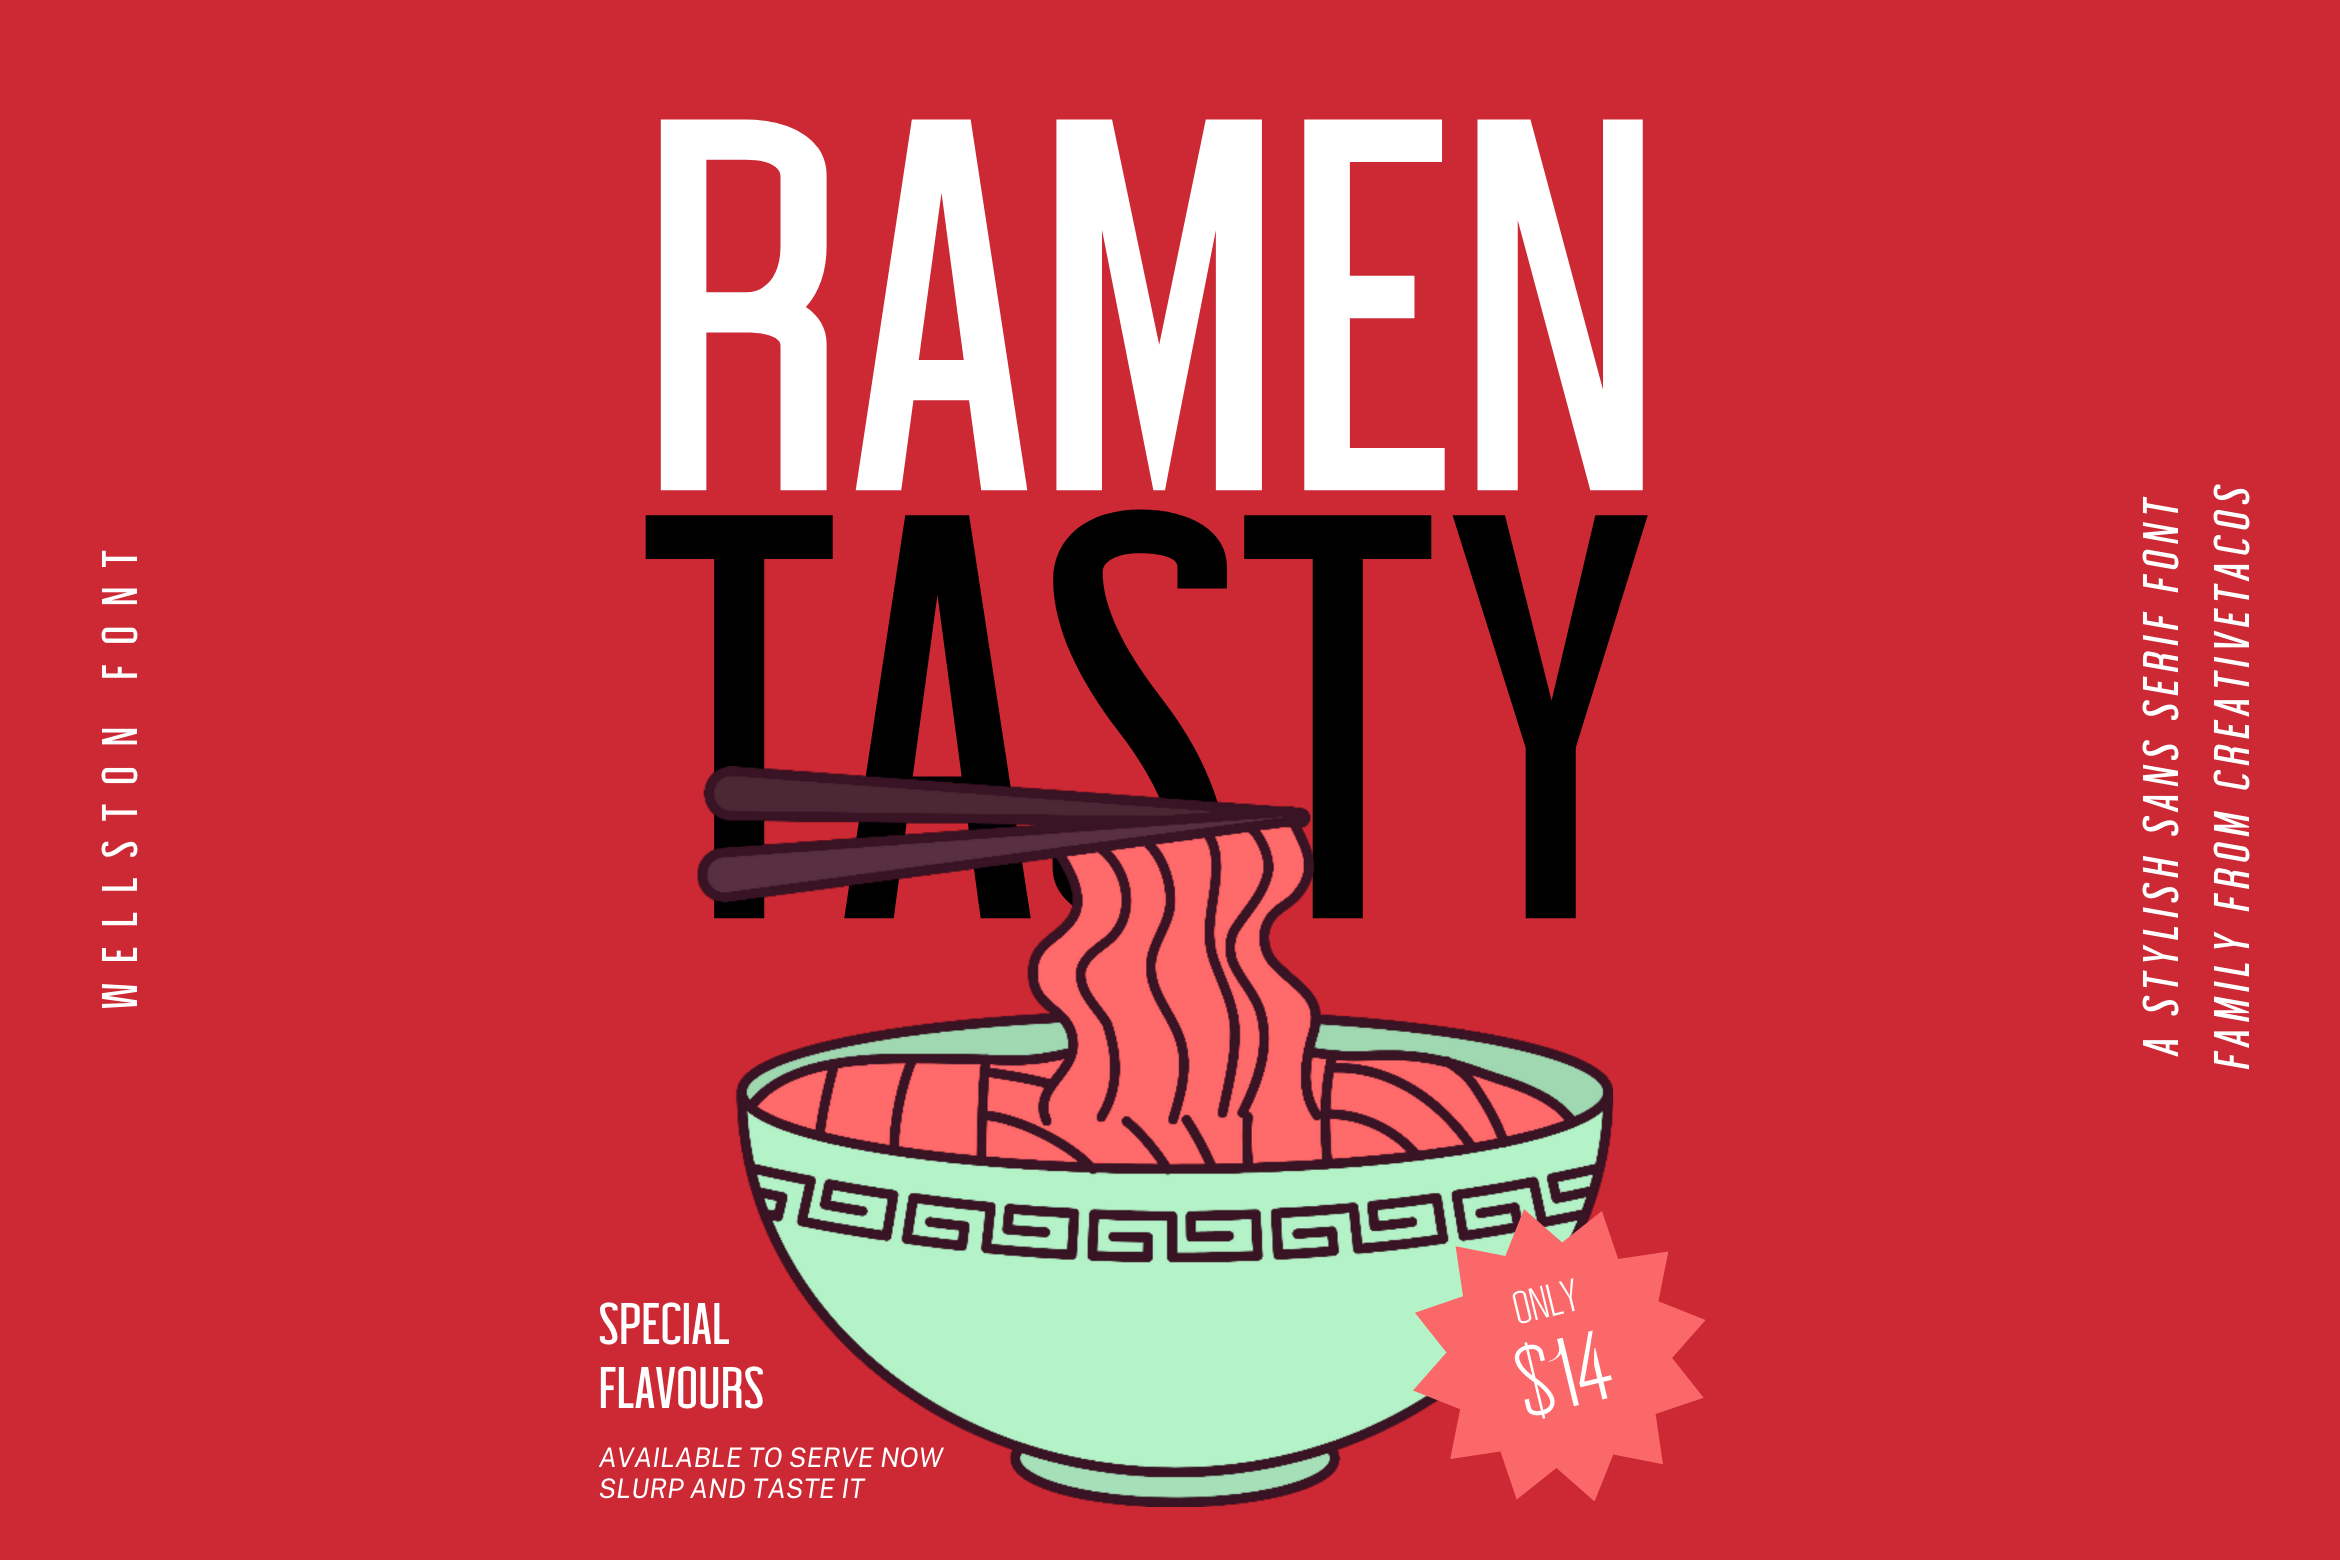 Red background advertisement for ramen at $14, using Wellston font for the bold white text and a graphic of noodles with chopsticks.